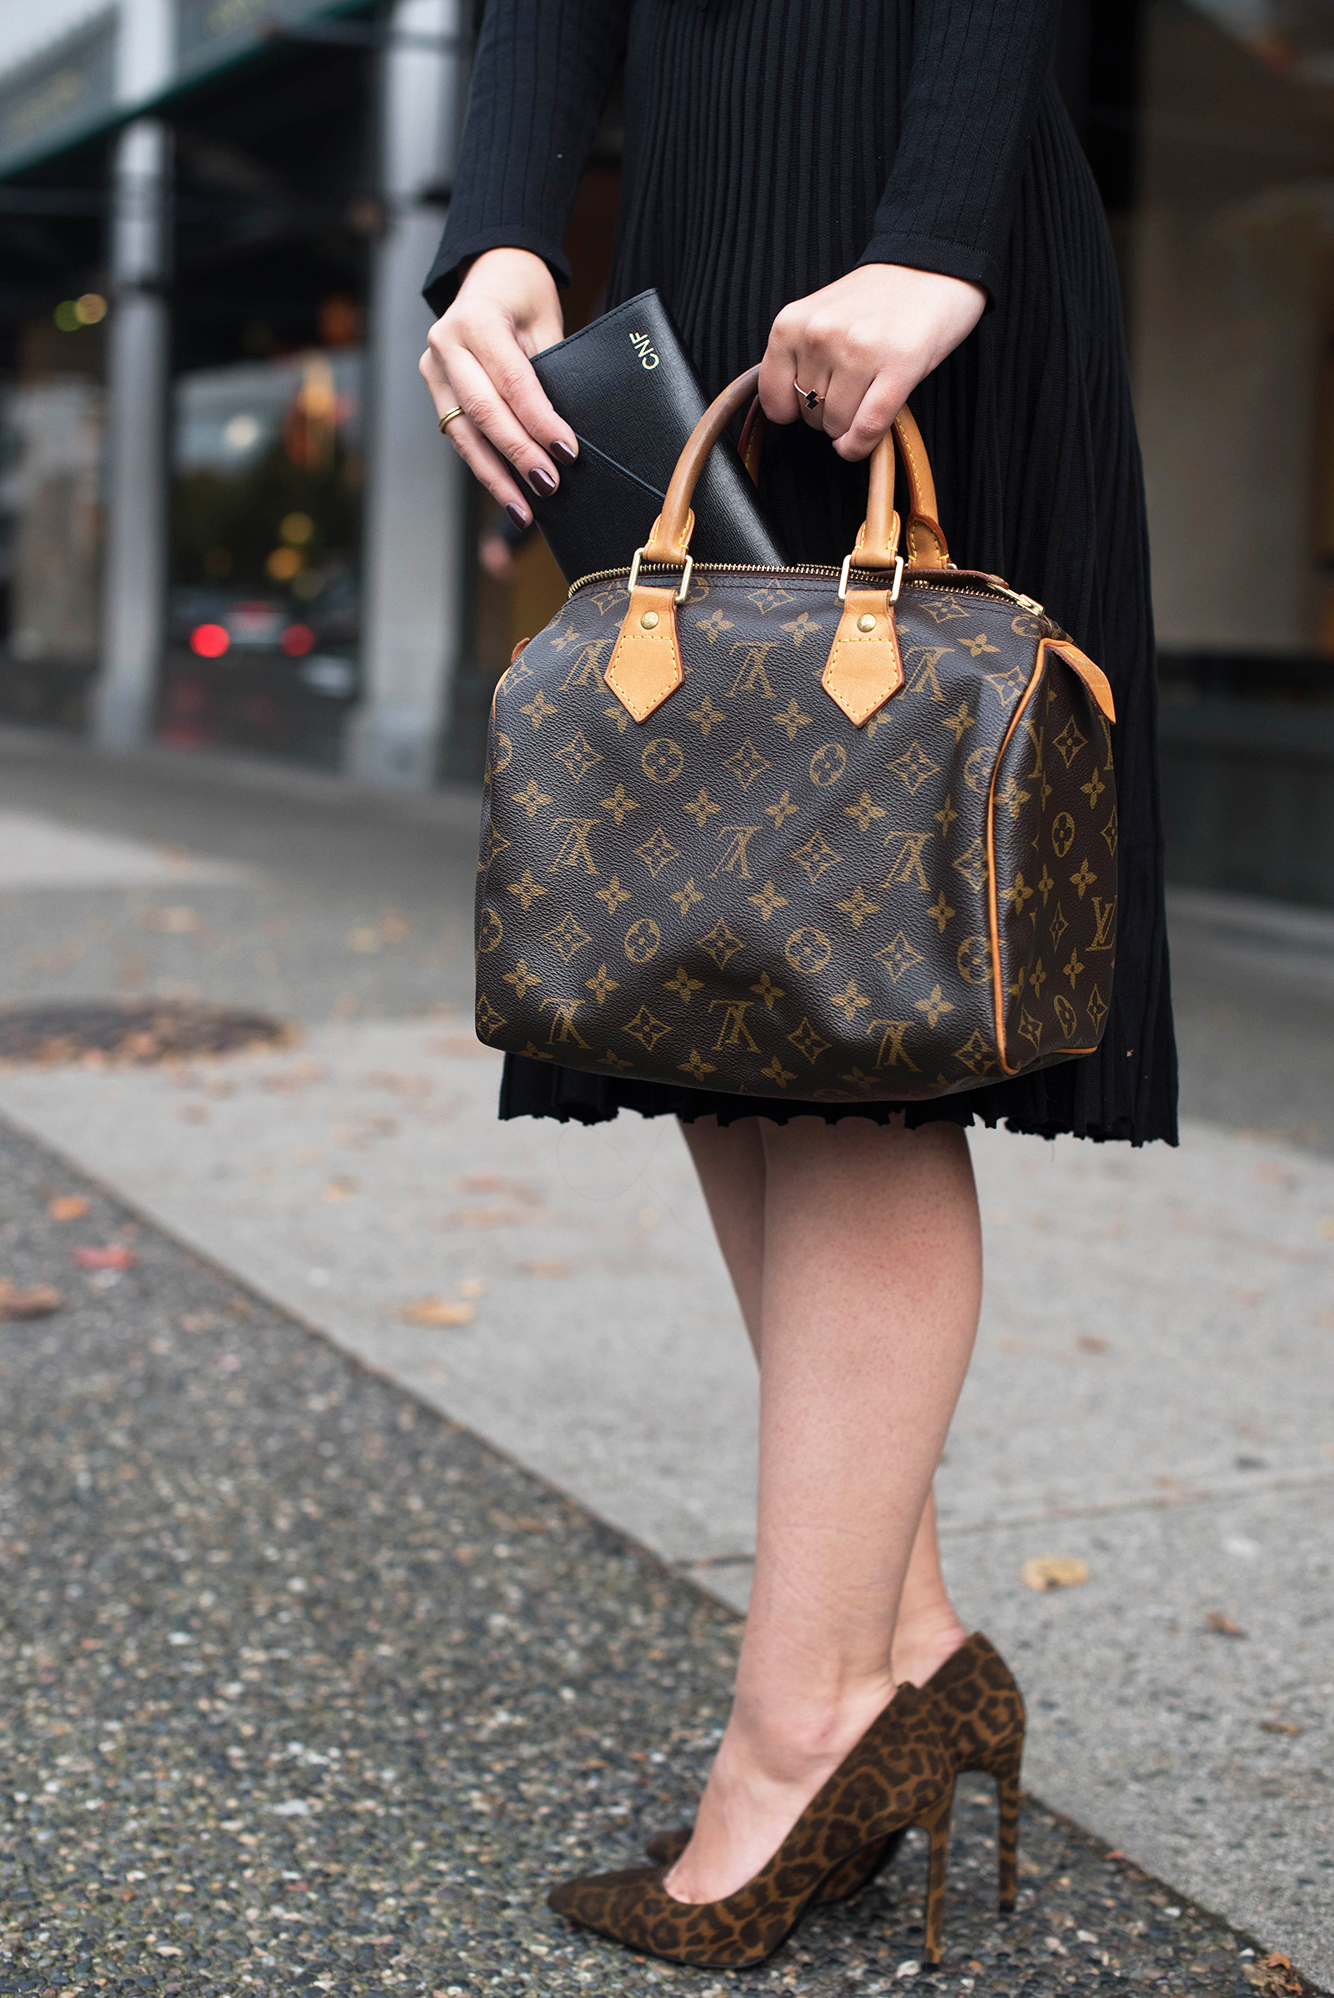 coco-and-vera-top-vancouver-fashion-blog-top-canadian-fashion-blog-top-blogger-outfit-details-louis-vuitton-speedy-25-neely-and-chloe-wallet-keltie-leanne-designs-brix-ring-ysl-pumps-copy-copy